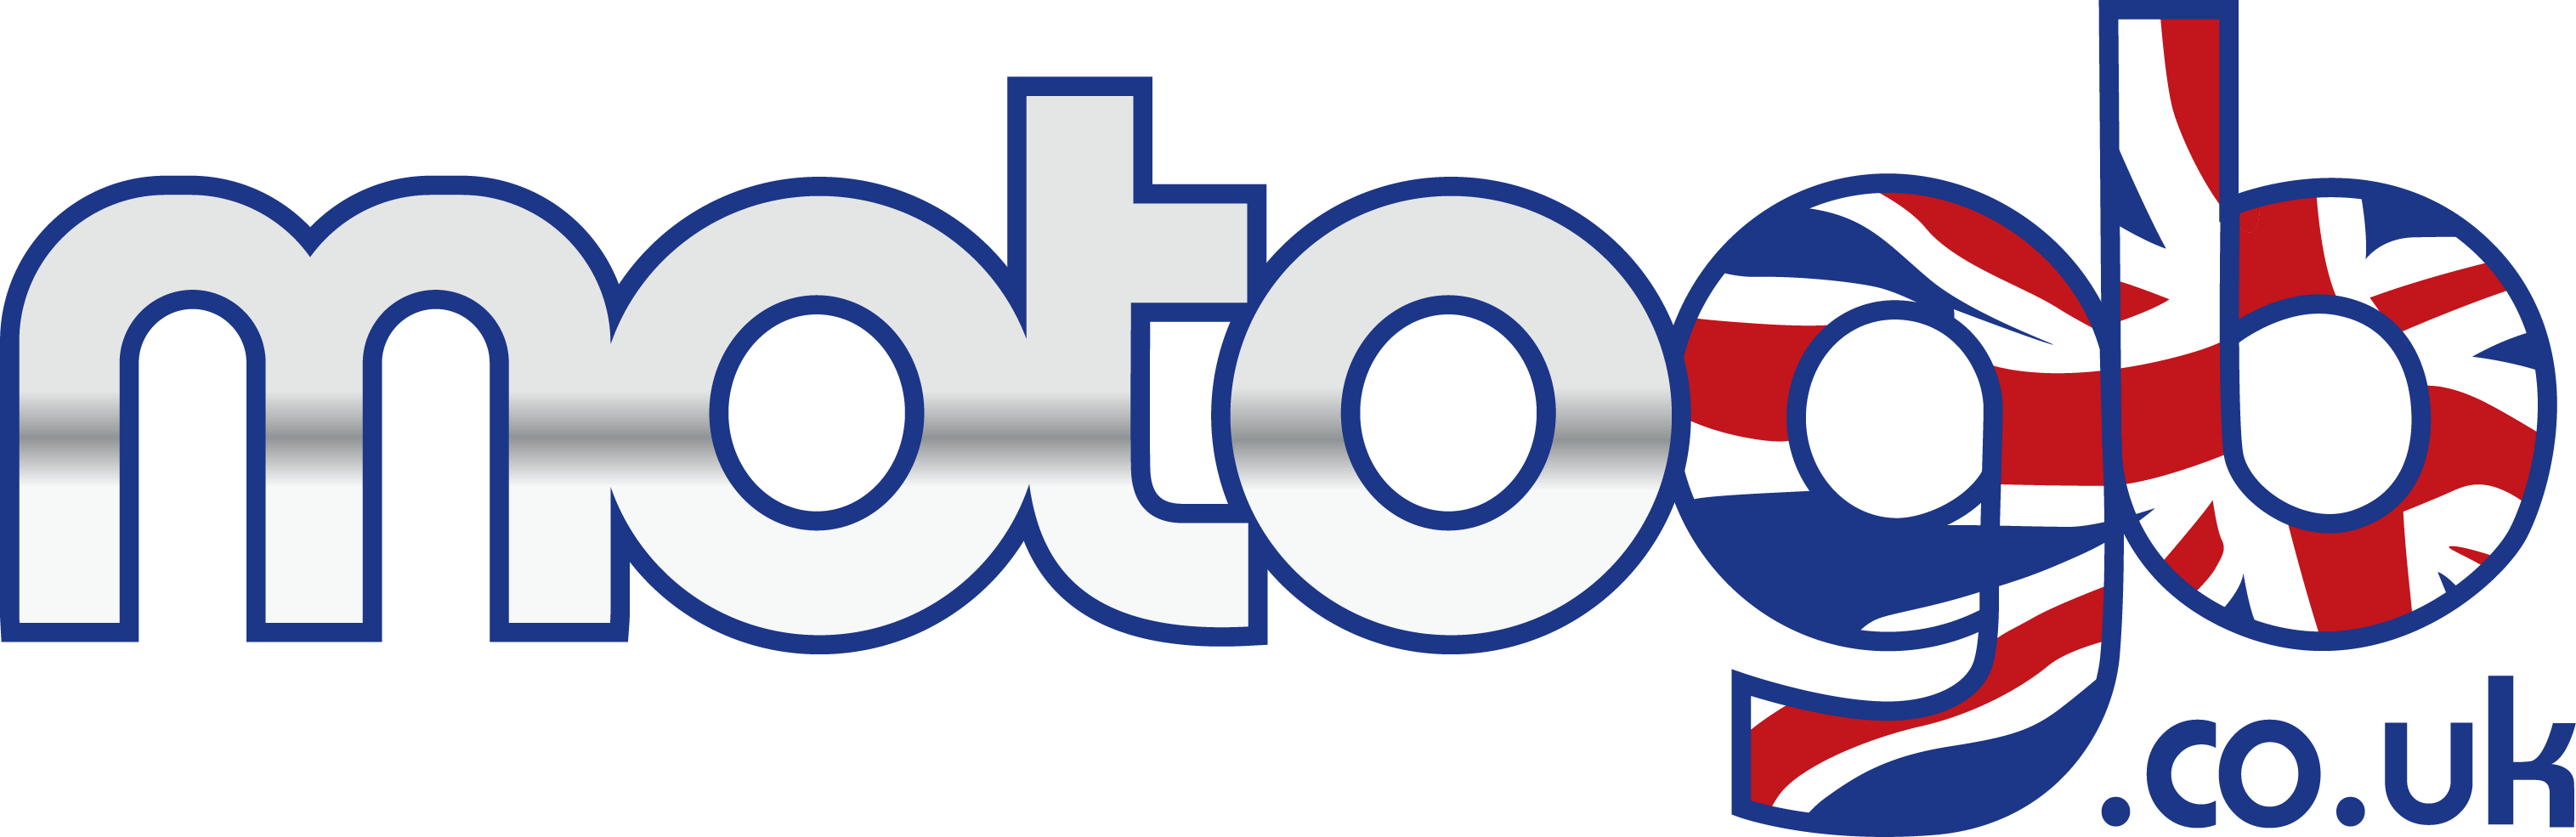 MotoGB Motorcycles & Scooters Distributor